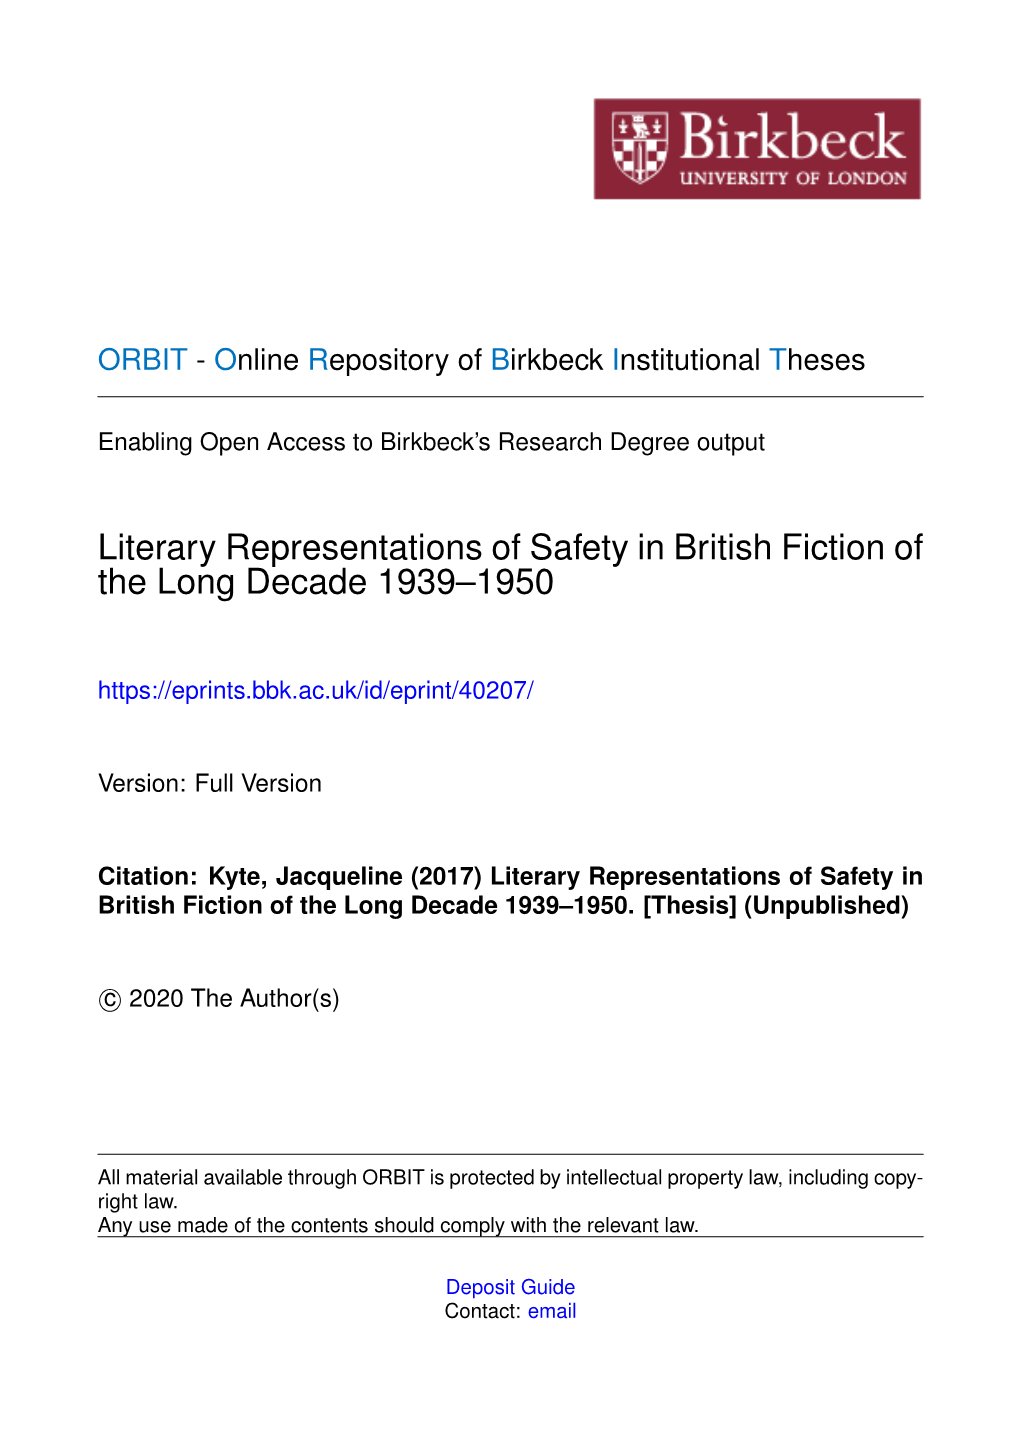 Literary Representations of Safety in British Fiction of the Long Decade 1939–1950